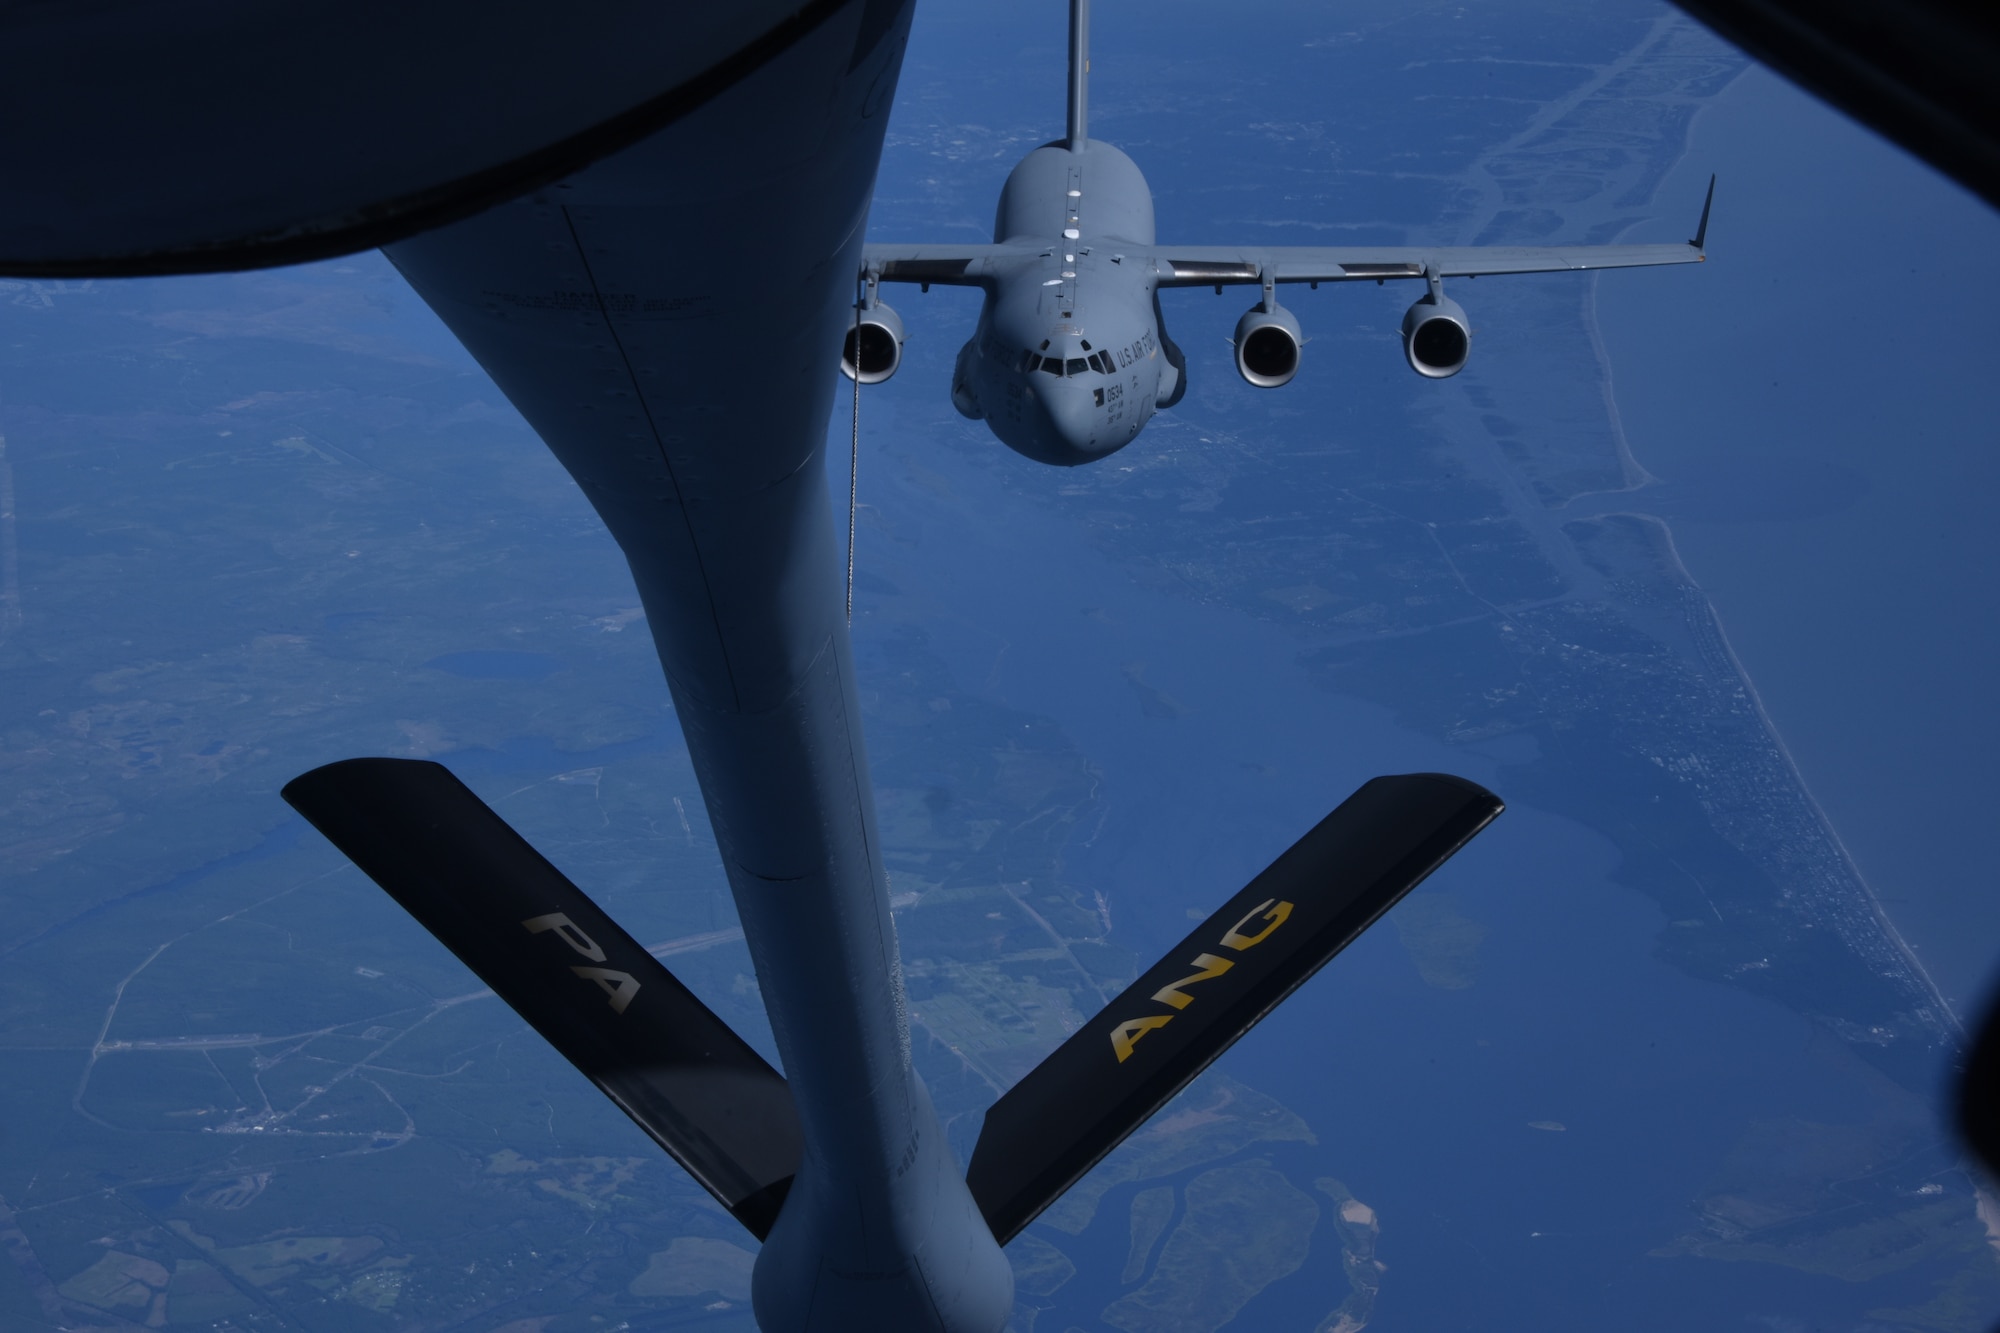 A C-17 Globemaster III trails a KC-135 Stratotanker before conducting air refueling operations near the coast of N.C. Sept. 28, 2018. The KC-135 can deliver up to 4,800 pounds or 716 gallons of jet fuel per minute. (U.S. Air National Guard photo by Staff Sgt. Bryan Hoover)